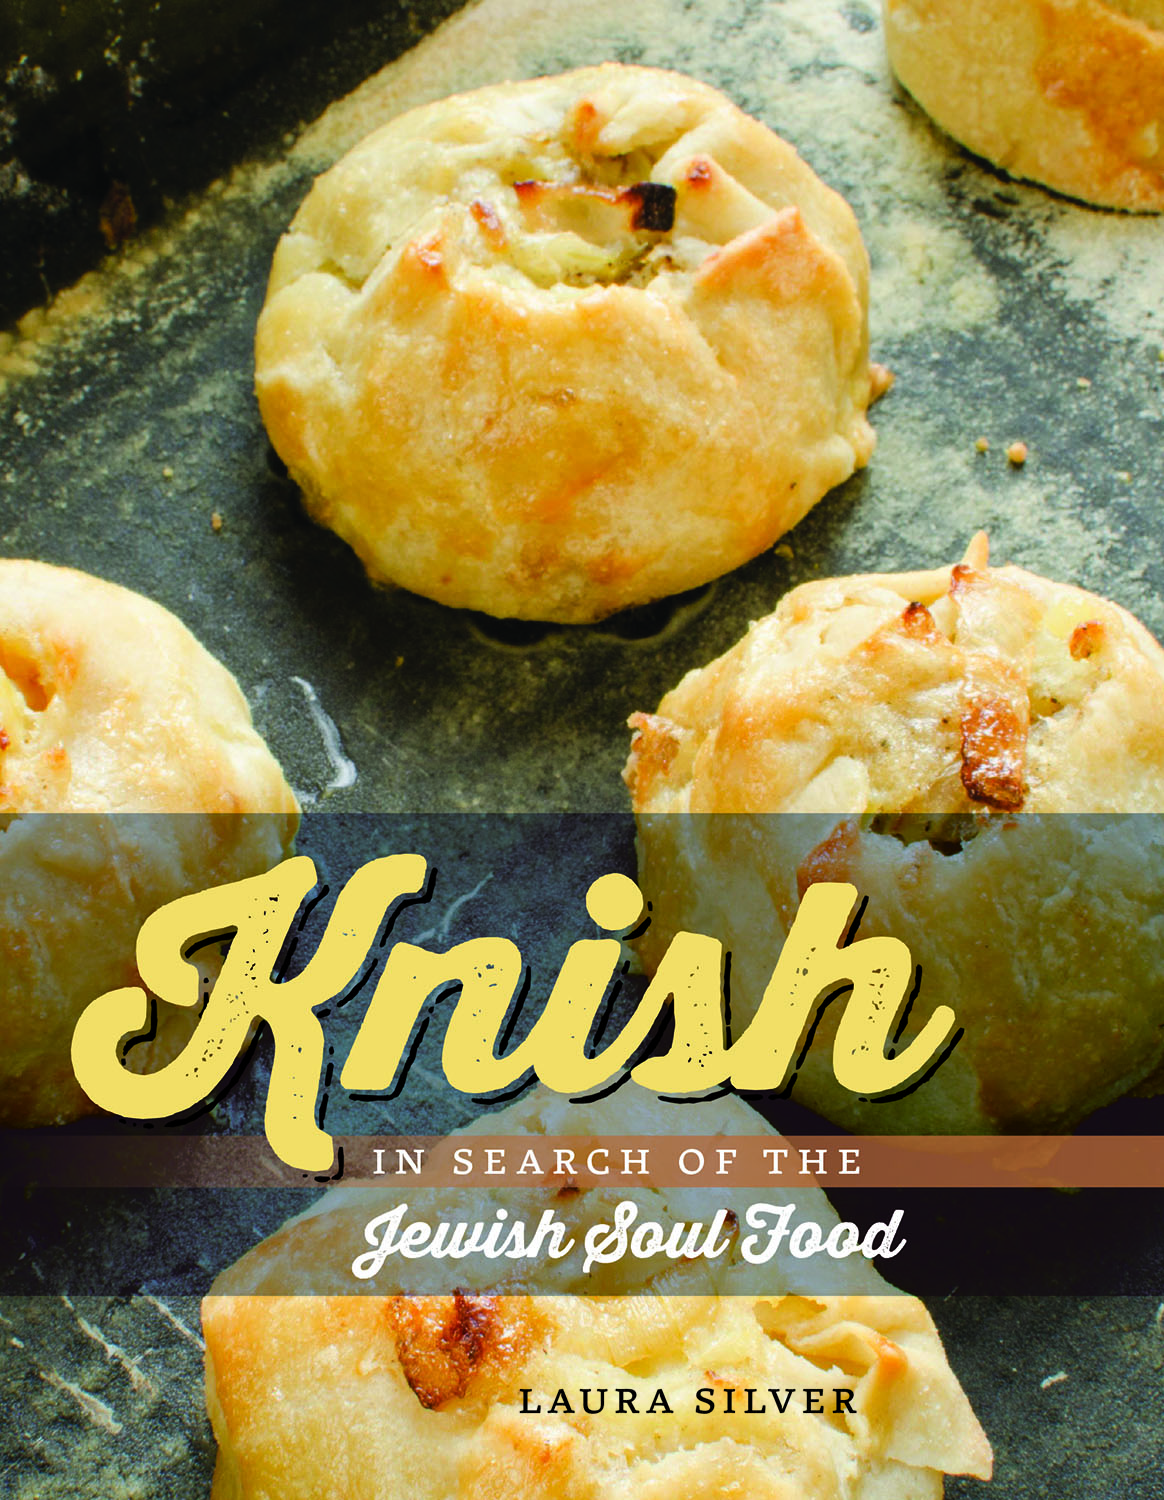 Discussion & Tasting: Knish, In Search of the Jewish Soul Food by Laura Silver, co-sponsored by The Workmen's Circle